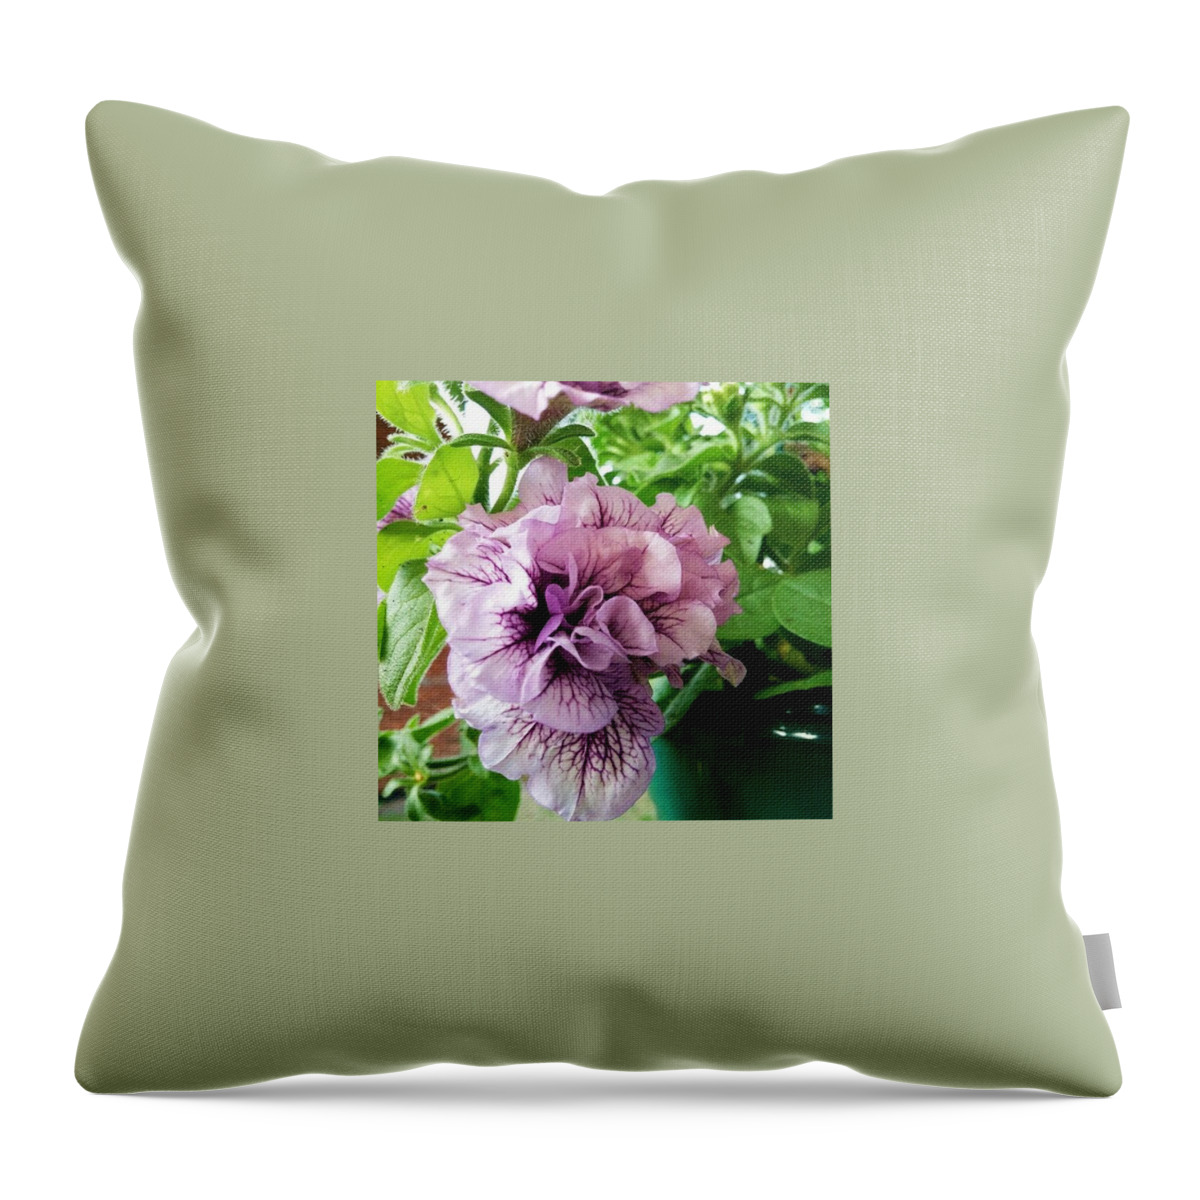 Flowers Throw Pillow featuring the photograph In My Garden #flowers #1 by Abbie Shores